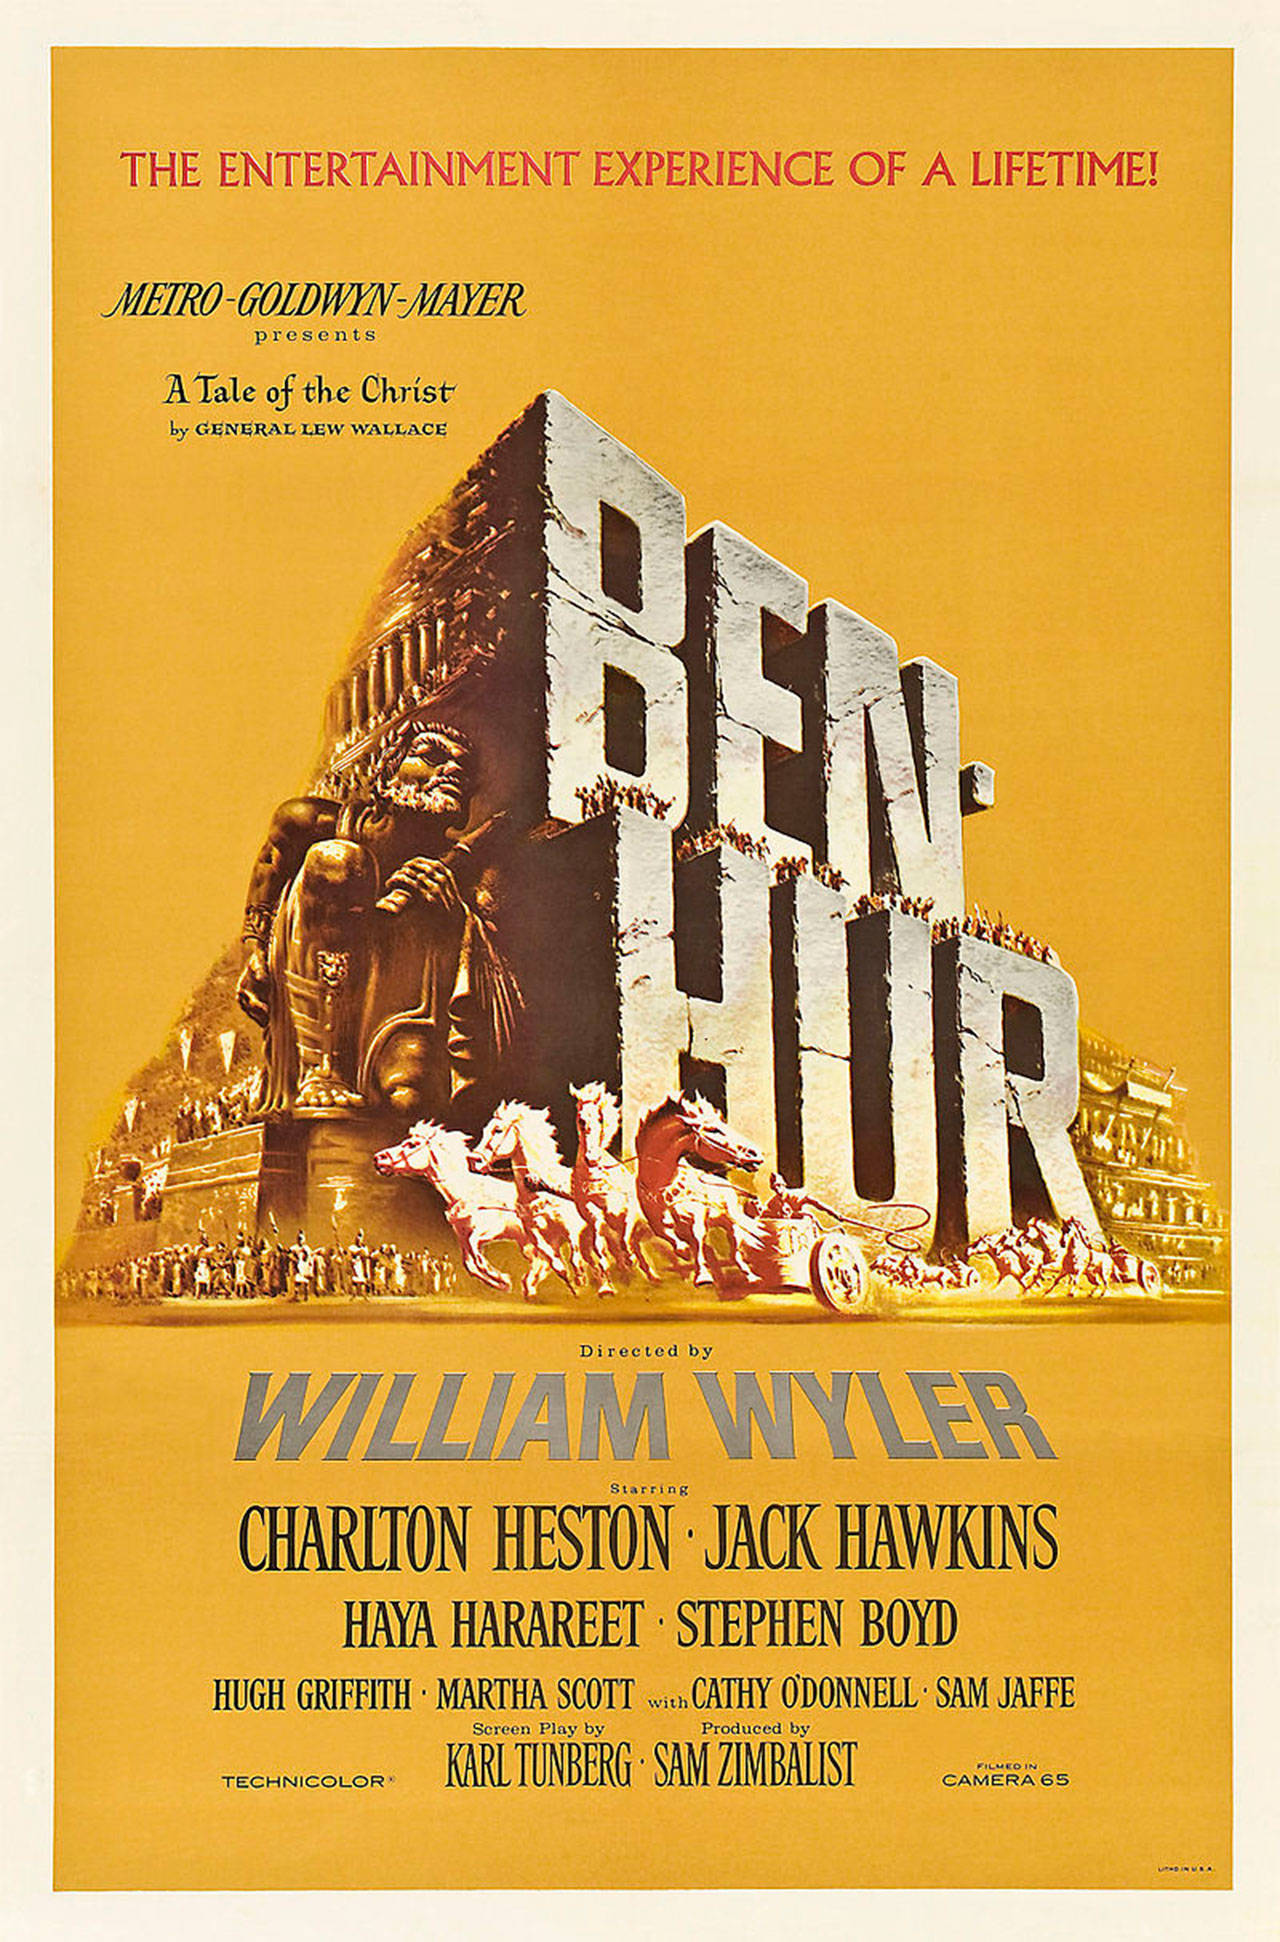 Image courtesy of Mero-Goldwyn-Mayer | “Ben-Hur,” the iconic 1959 epic religious drama directed by William Wyler will come roaring back onto the big screen at Bainbridge Cinemas at 6 p.m. Wednesday, April 17 for a special one-night-only 60th anniversary screening.